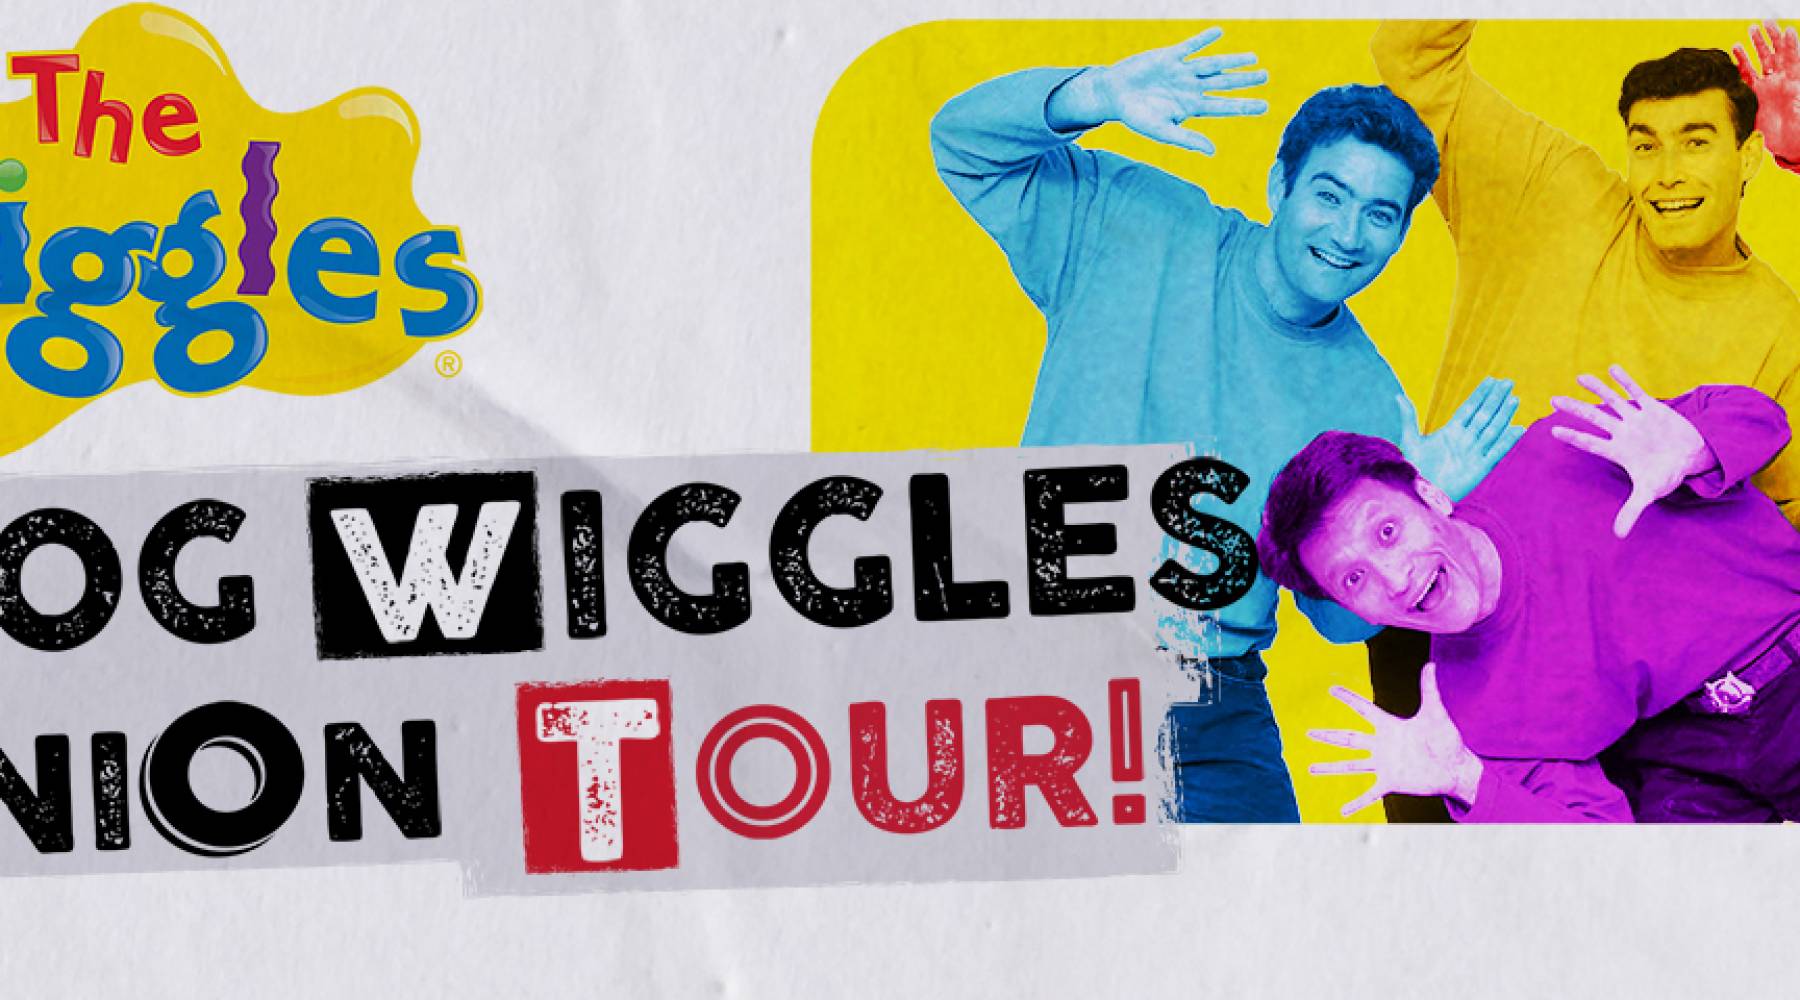 Archived The OG Wiggles Reunion Heart of the City